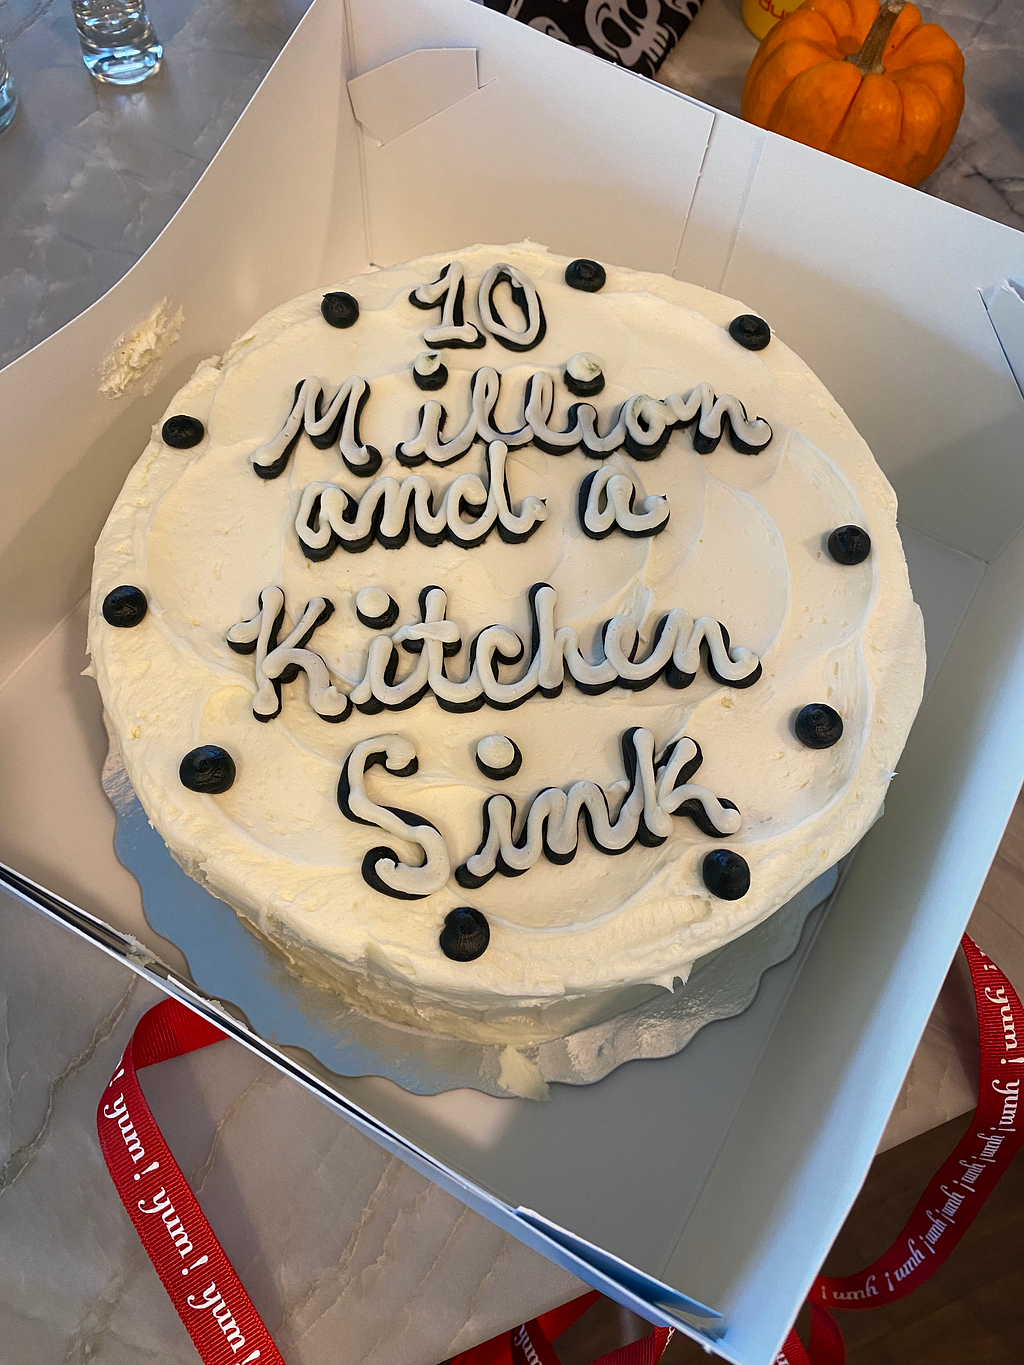 My wife got me this cake when we crossed $10M in ARR, and like the cake, we did not sit round very long. To the moon!